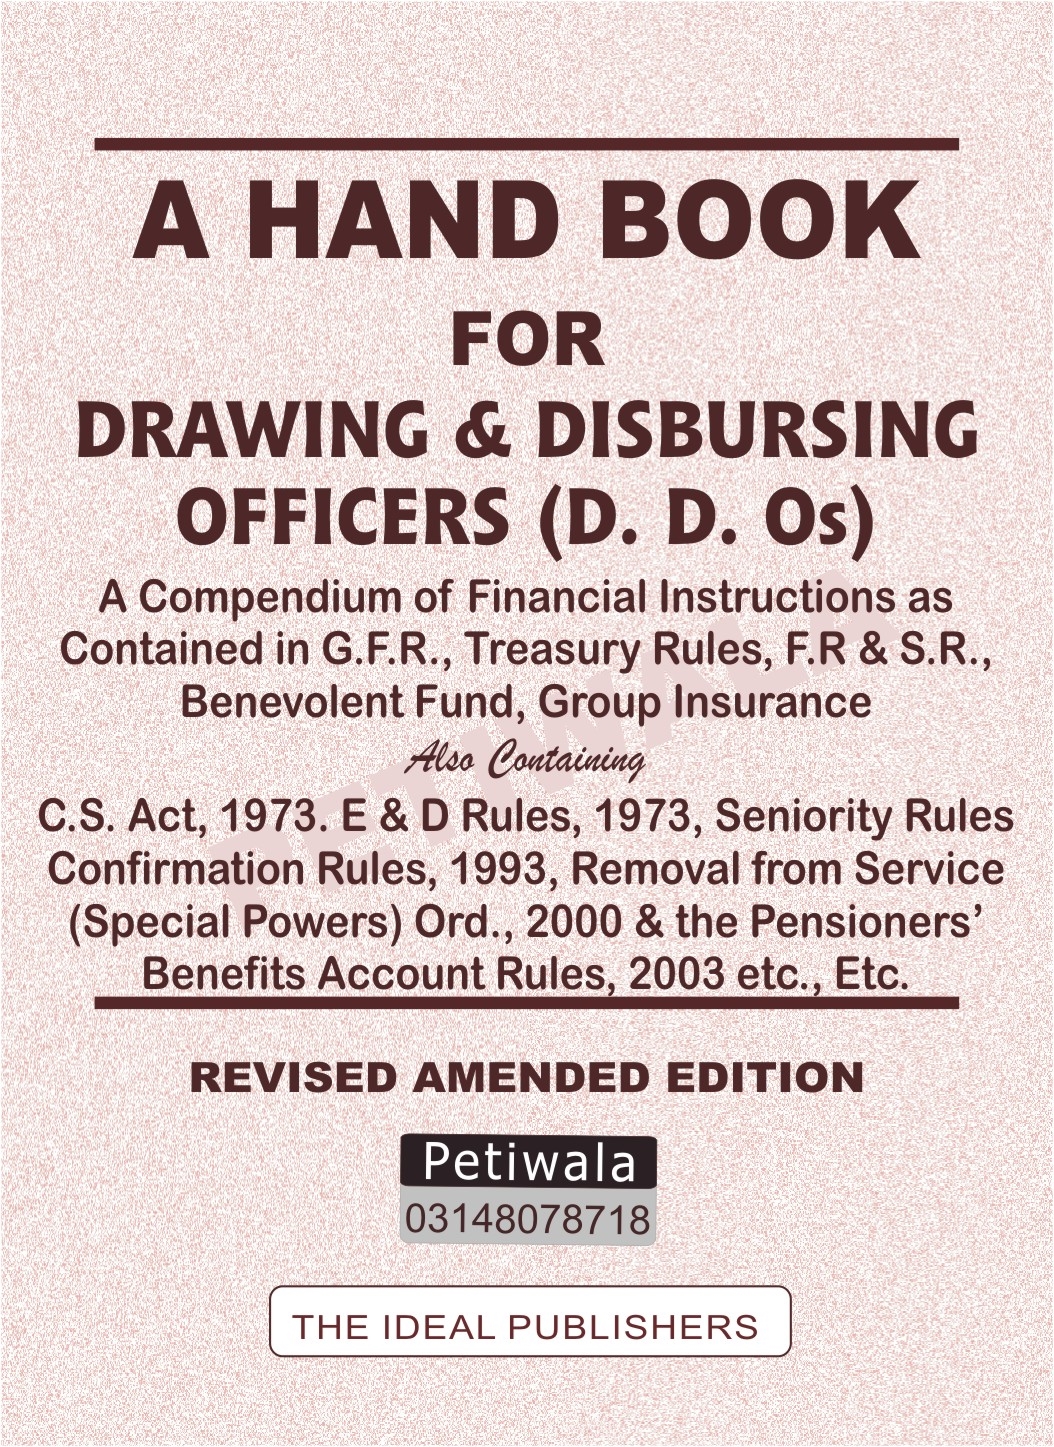 Hand Book for D.D.Os - A Hand Book for Drawing and Disbursing Officers